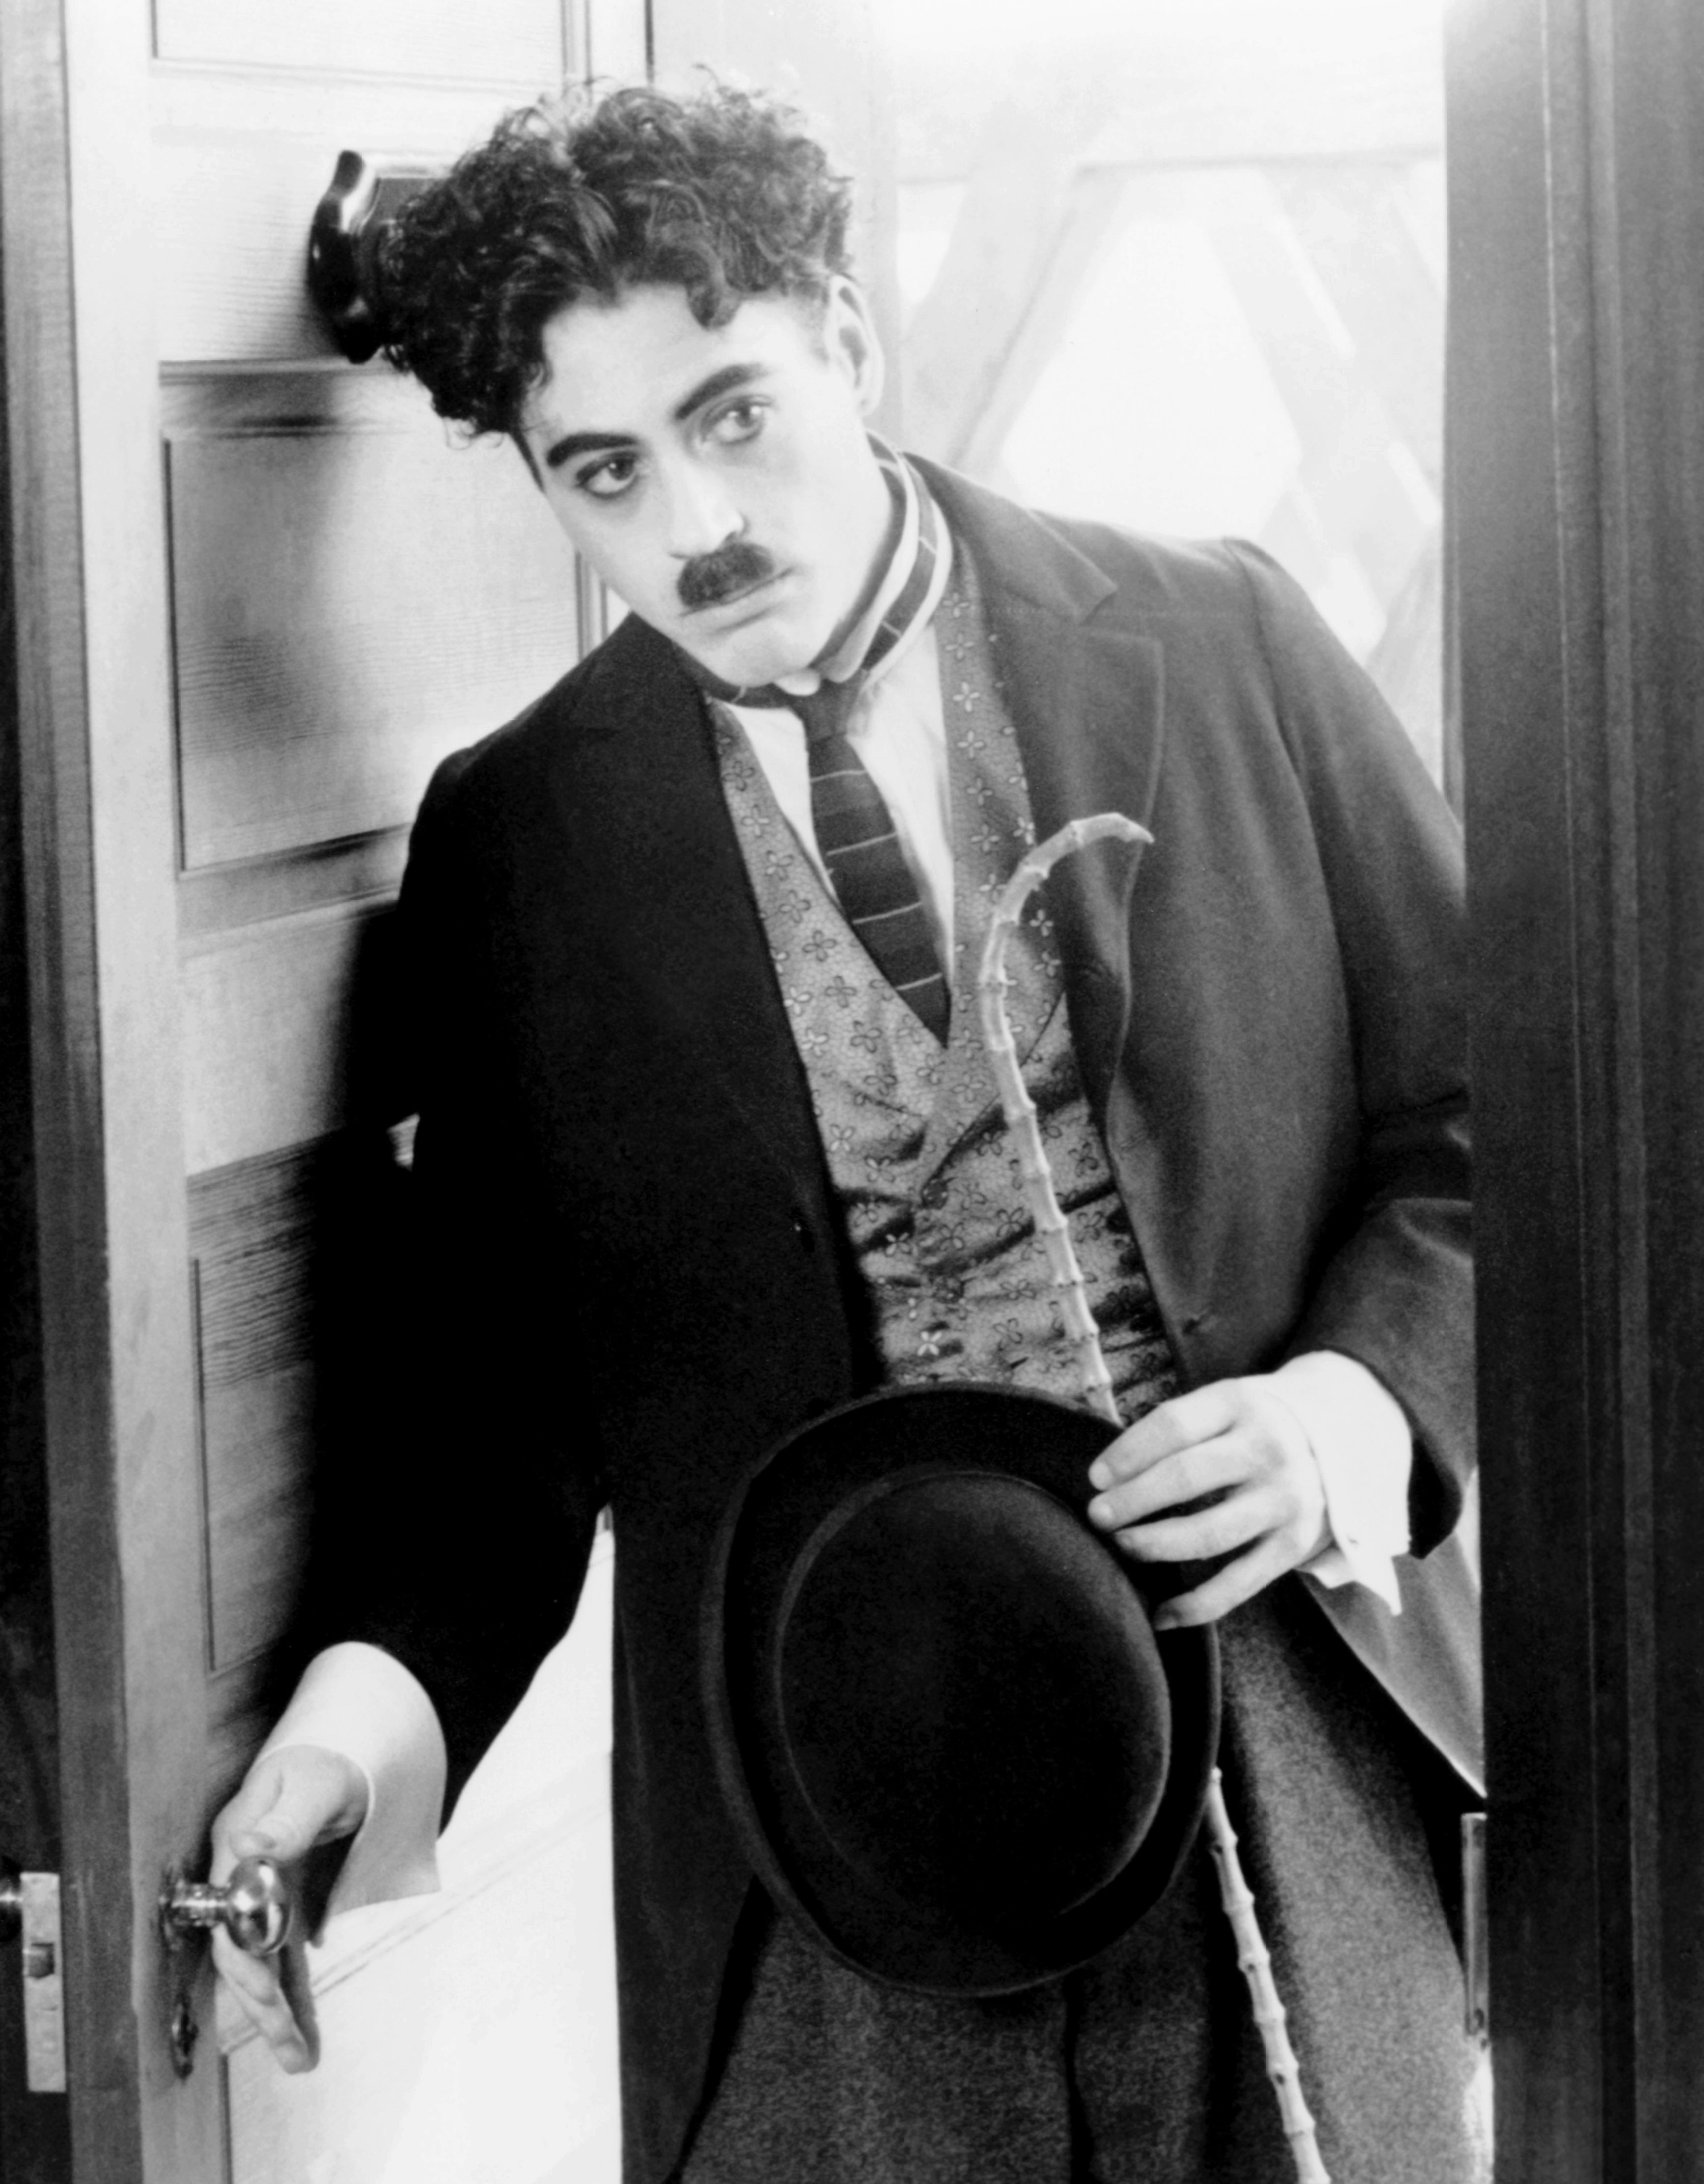 Robert in a black-and-white photo as Charlie with a small mustache and holding a hat